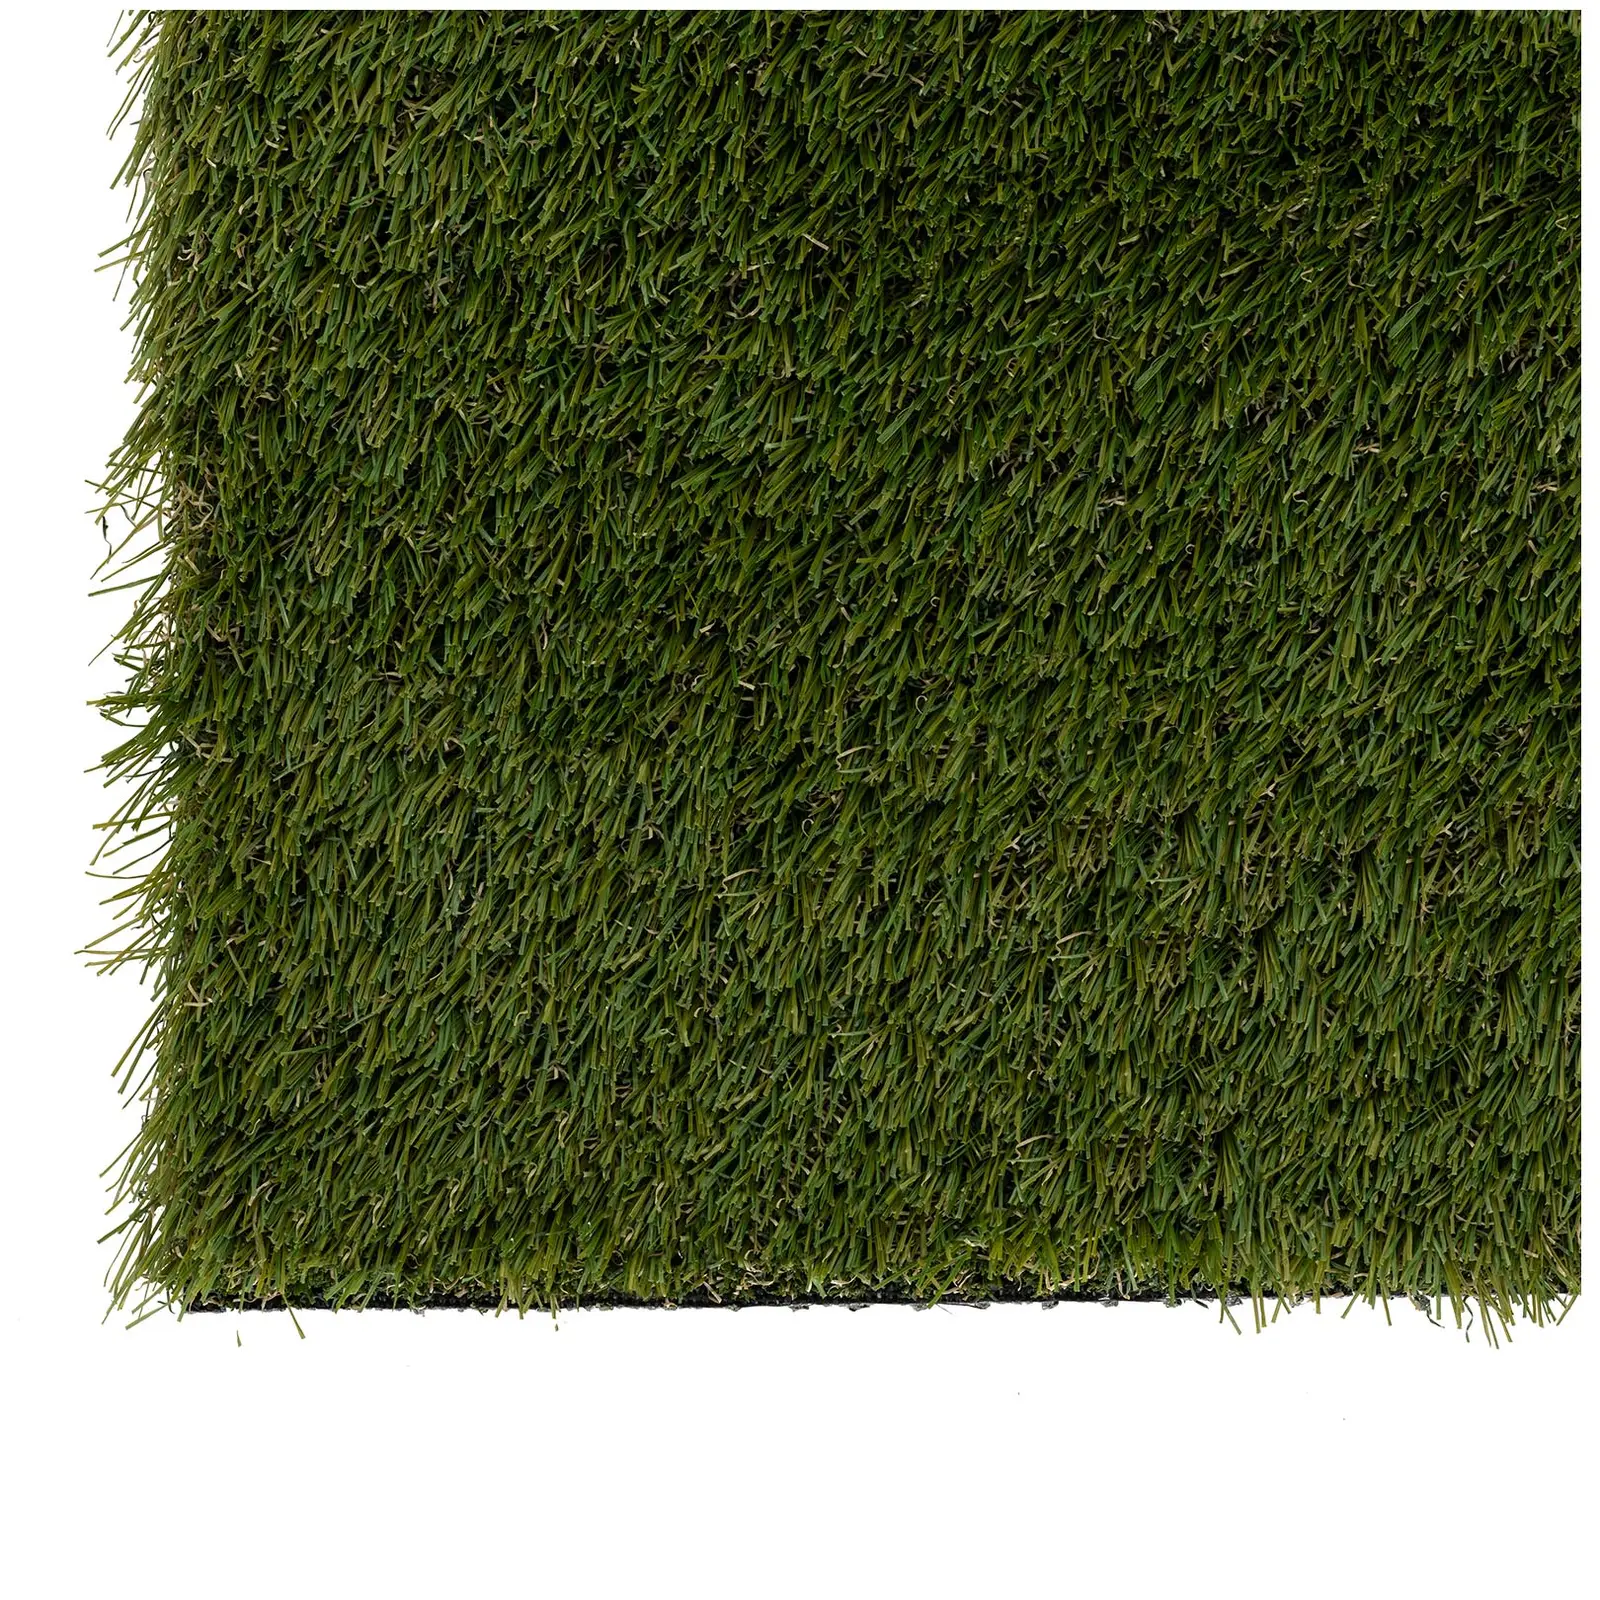 Artificial grass - 100 x 500 cm - Height: 30 mm - Stitch rate: 20/10 cm - UV-resistant